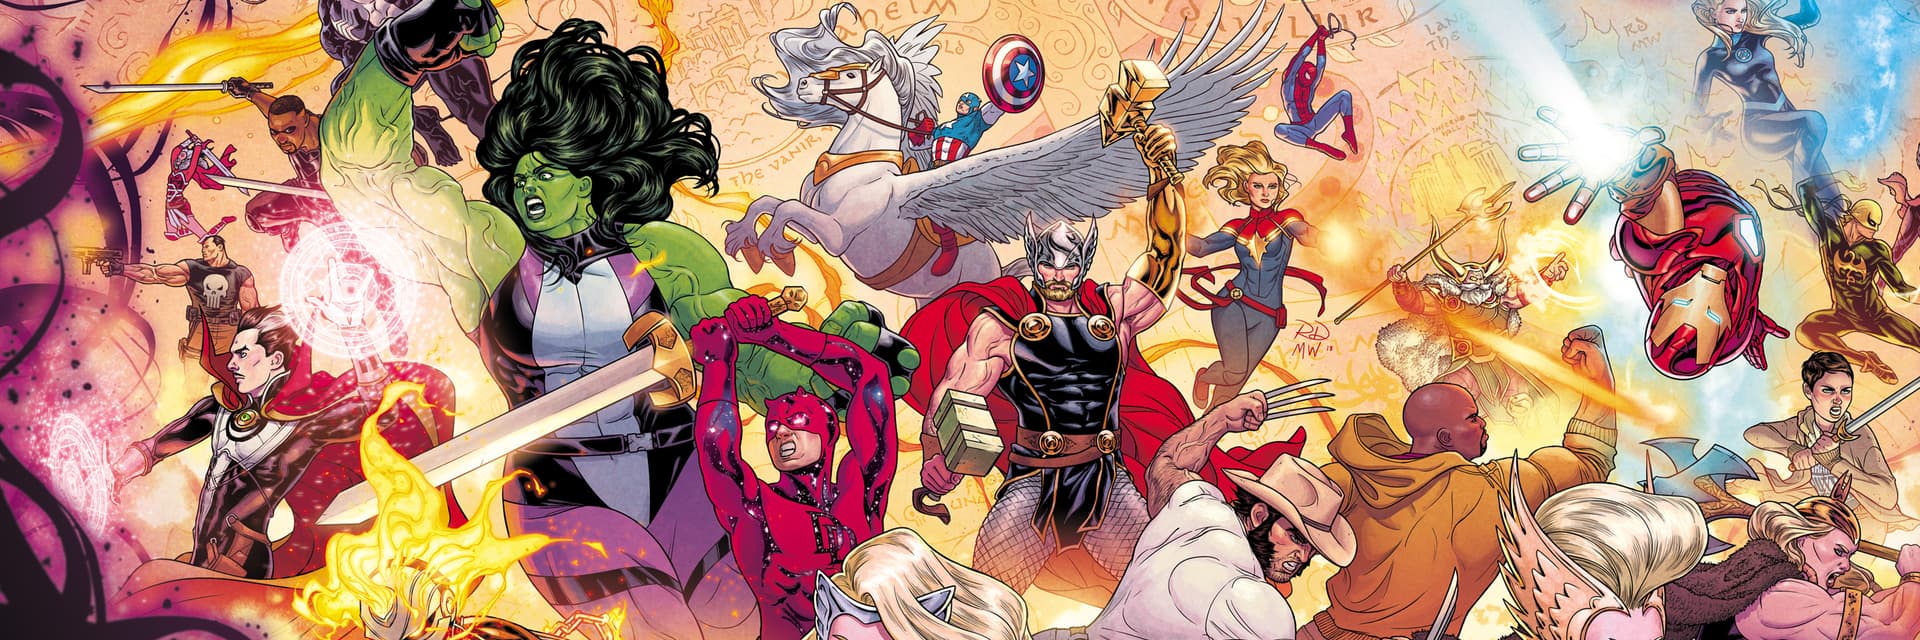 The War of the Realms Artwork